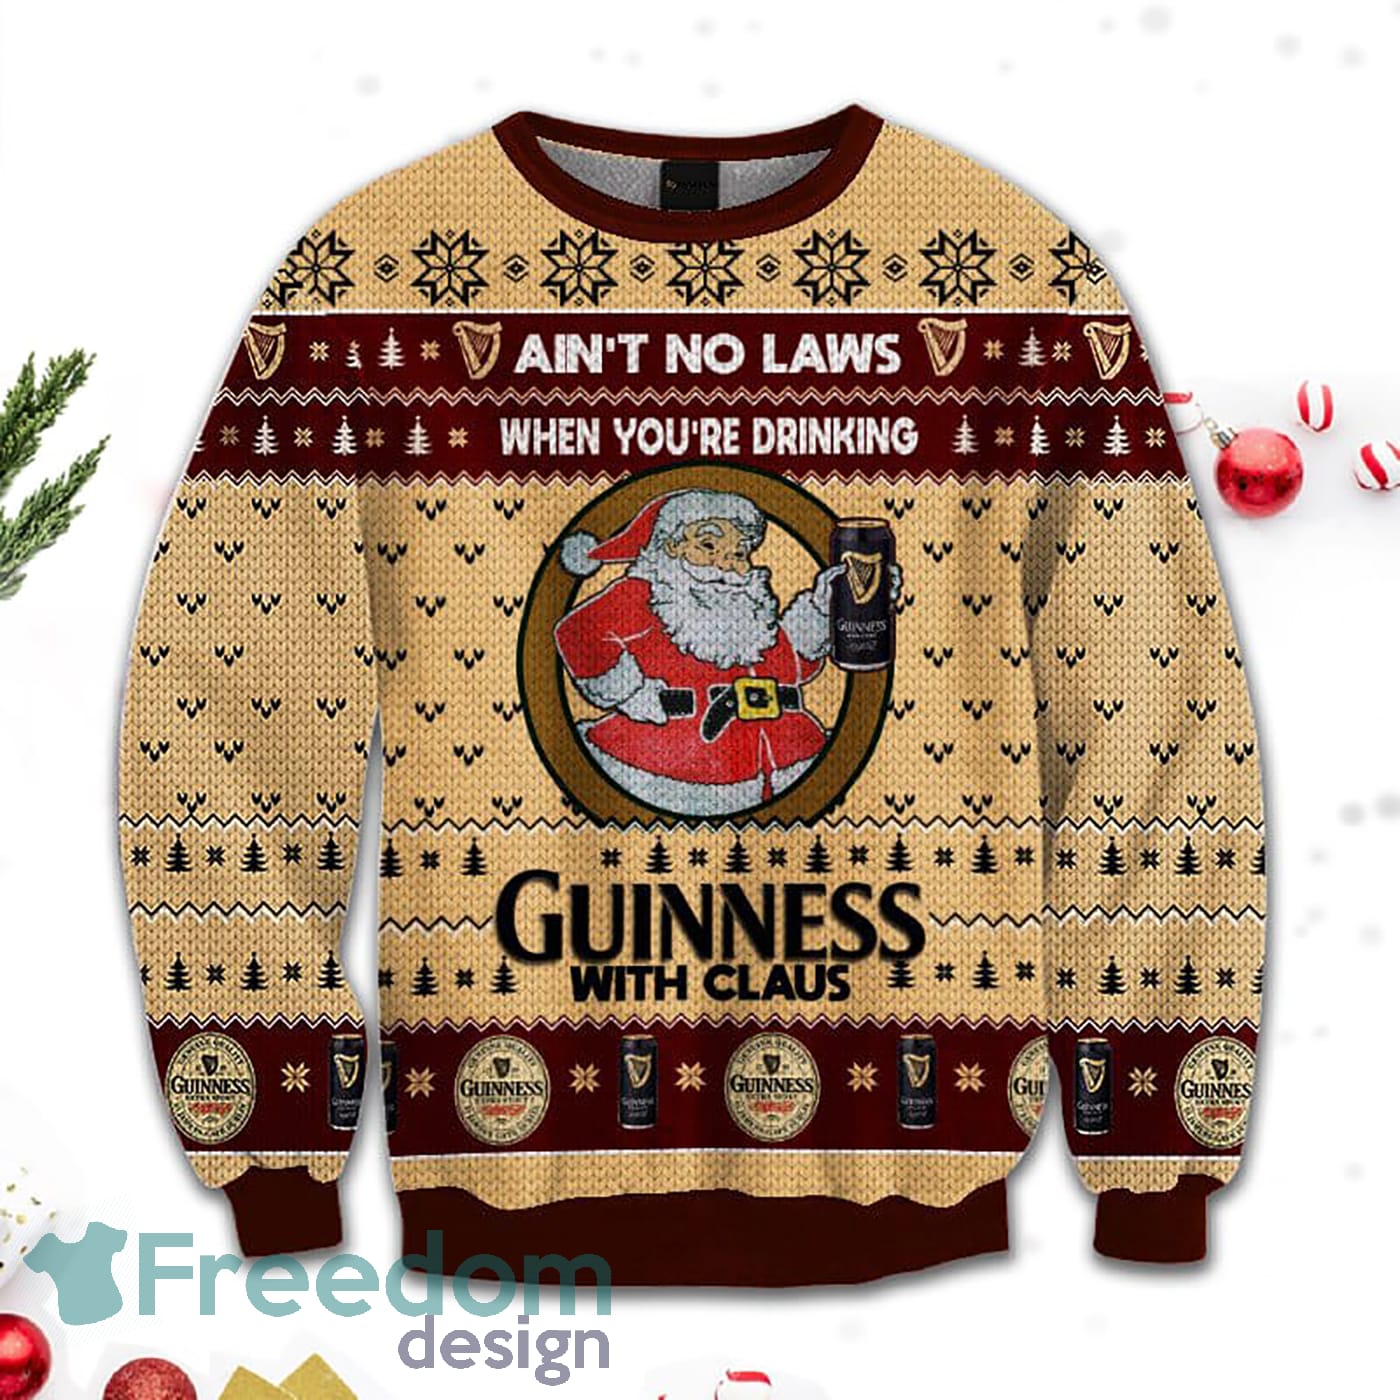 Merr Christmas Ain't No Laws When You Drink Guinness With Claus Sweatshirt